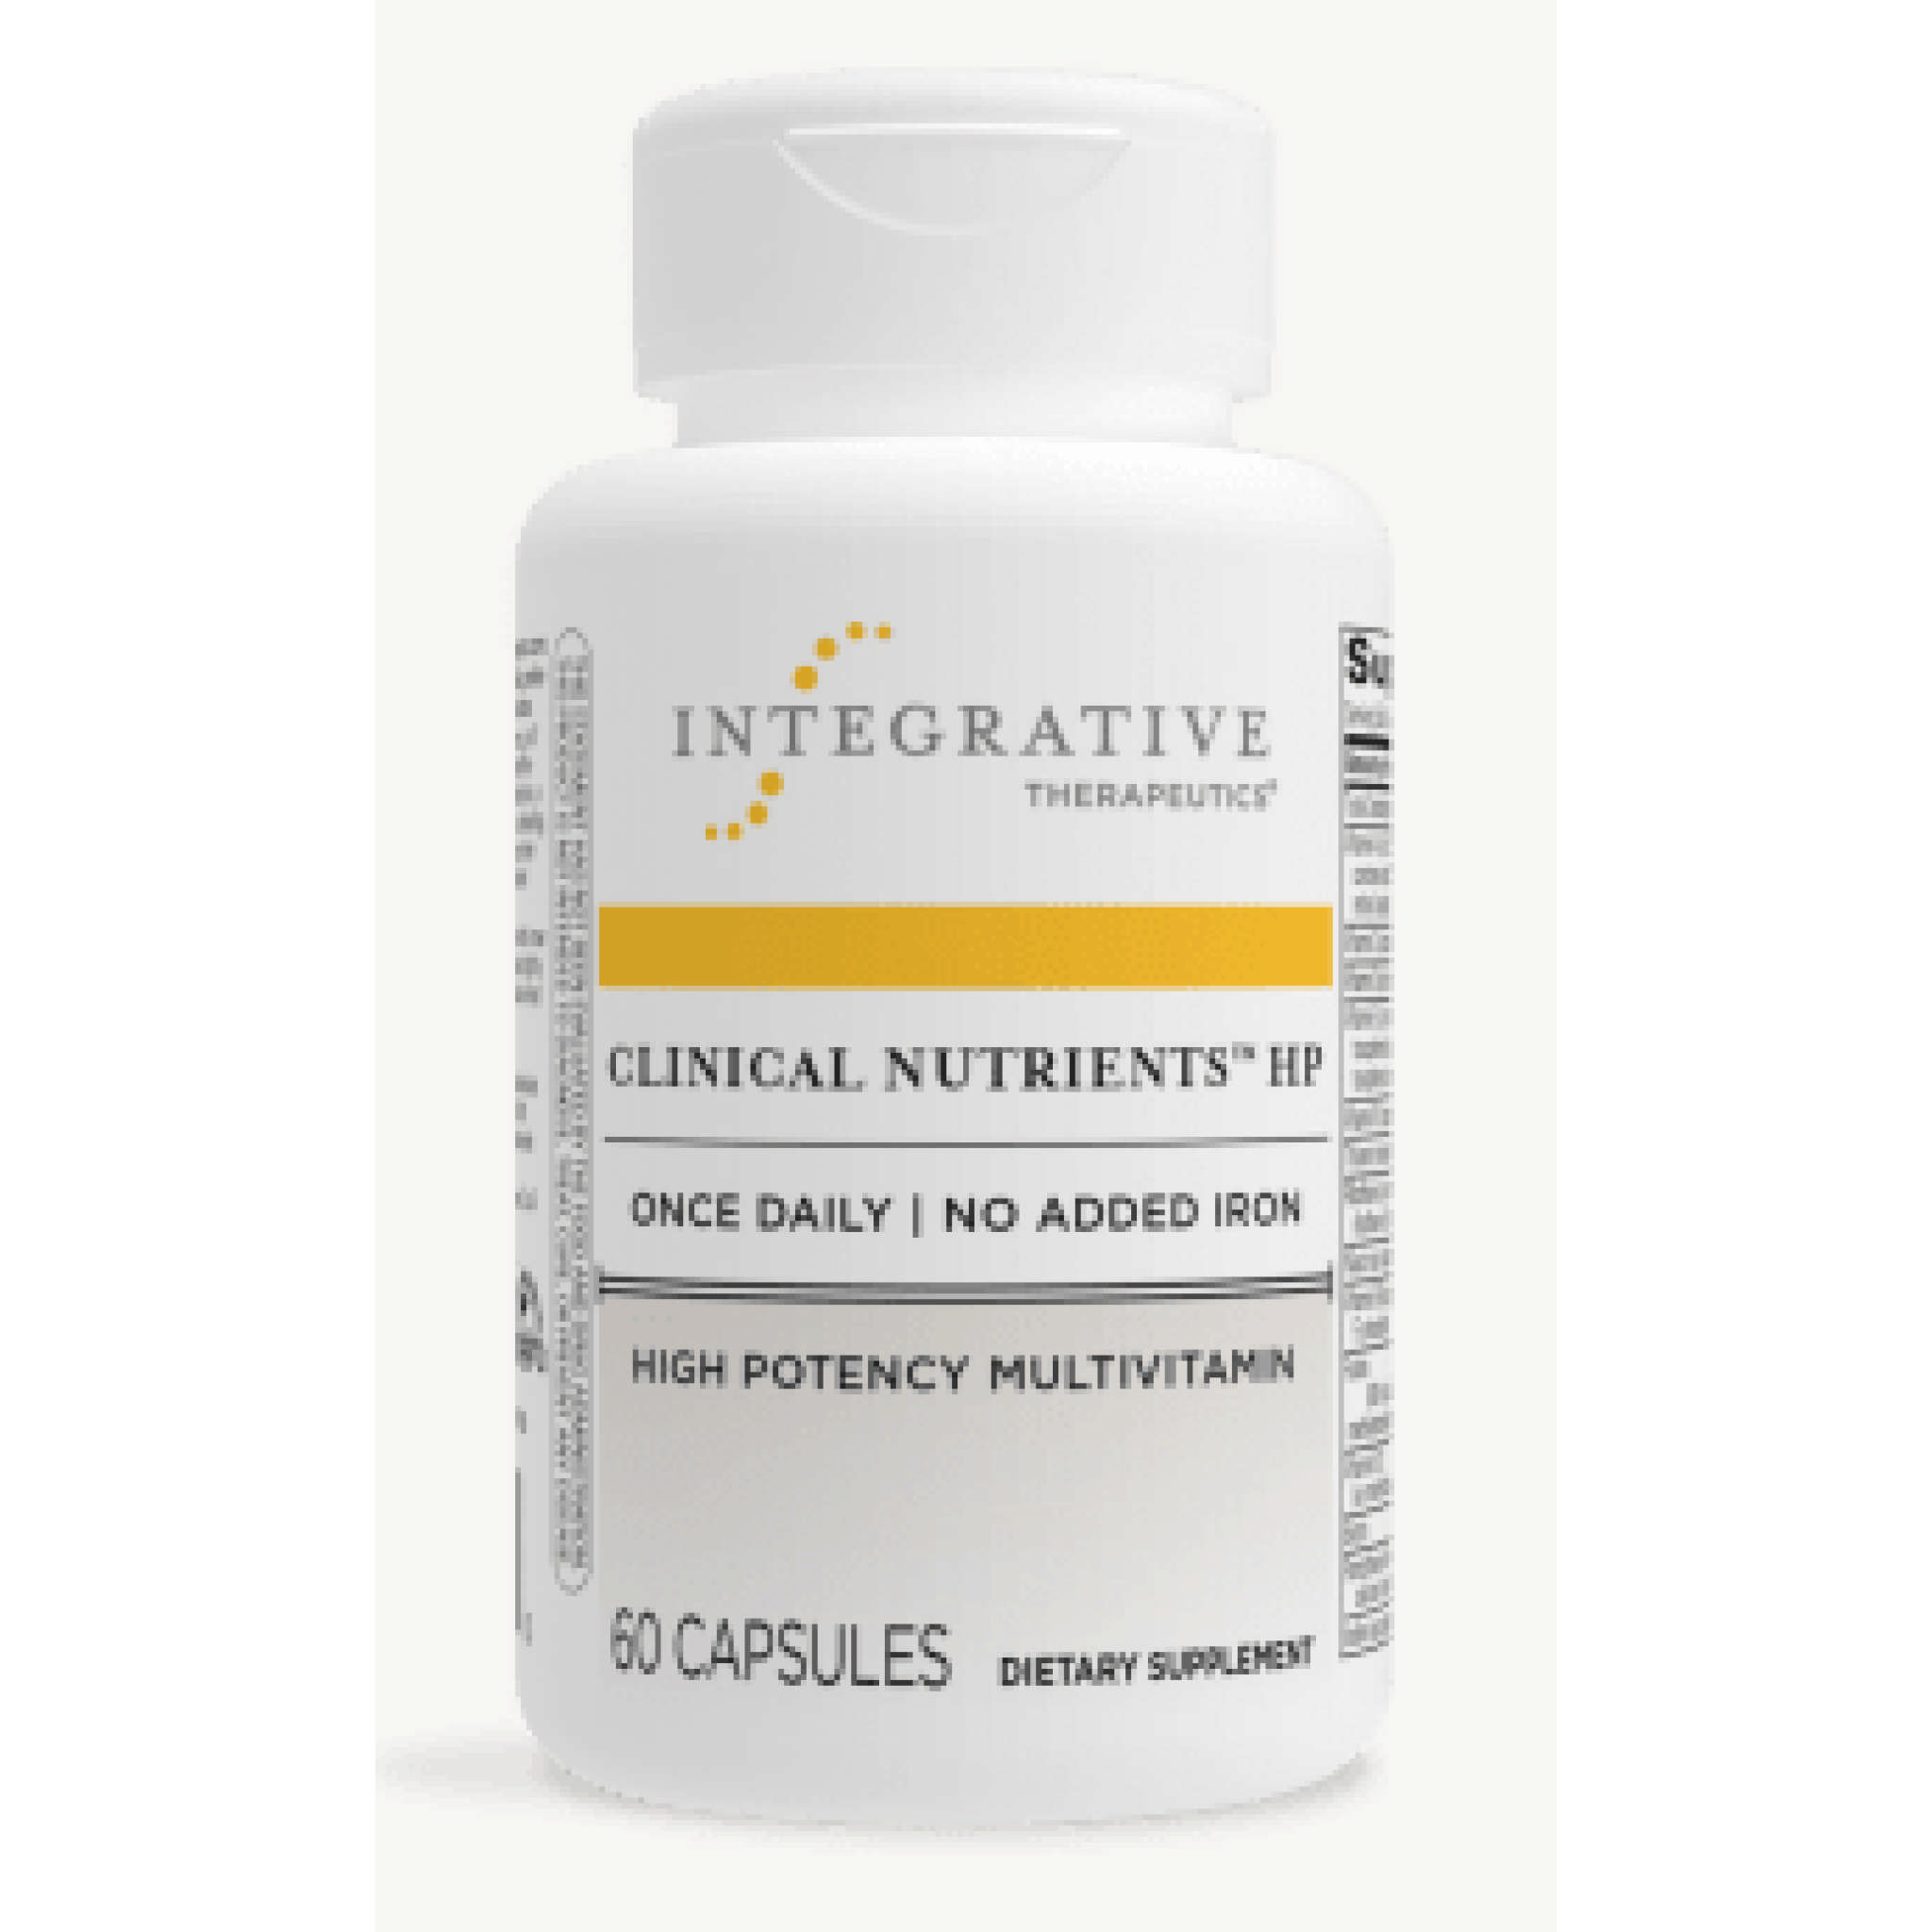 Integrative Therapy - Clinical Nutrients Hp No Iron